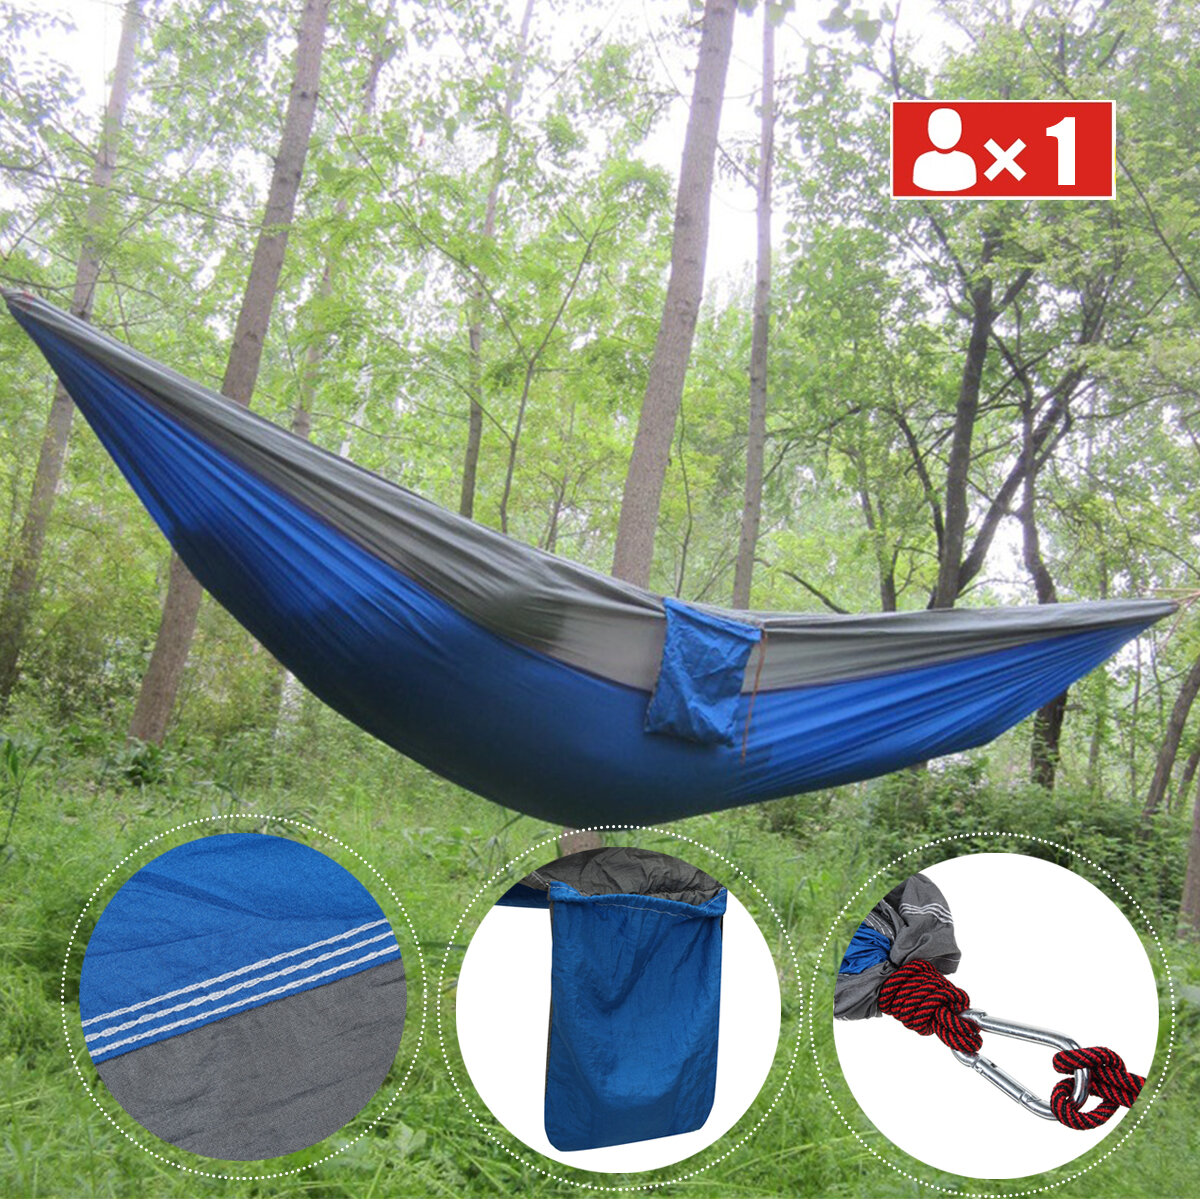 Single People Hanging Swing Bed Camping Hammock Outdoor Garden Travel with Storage Bag Carabiner Max